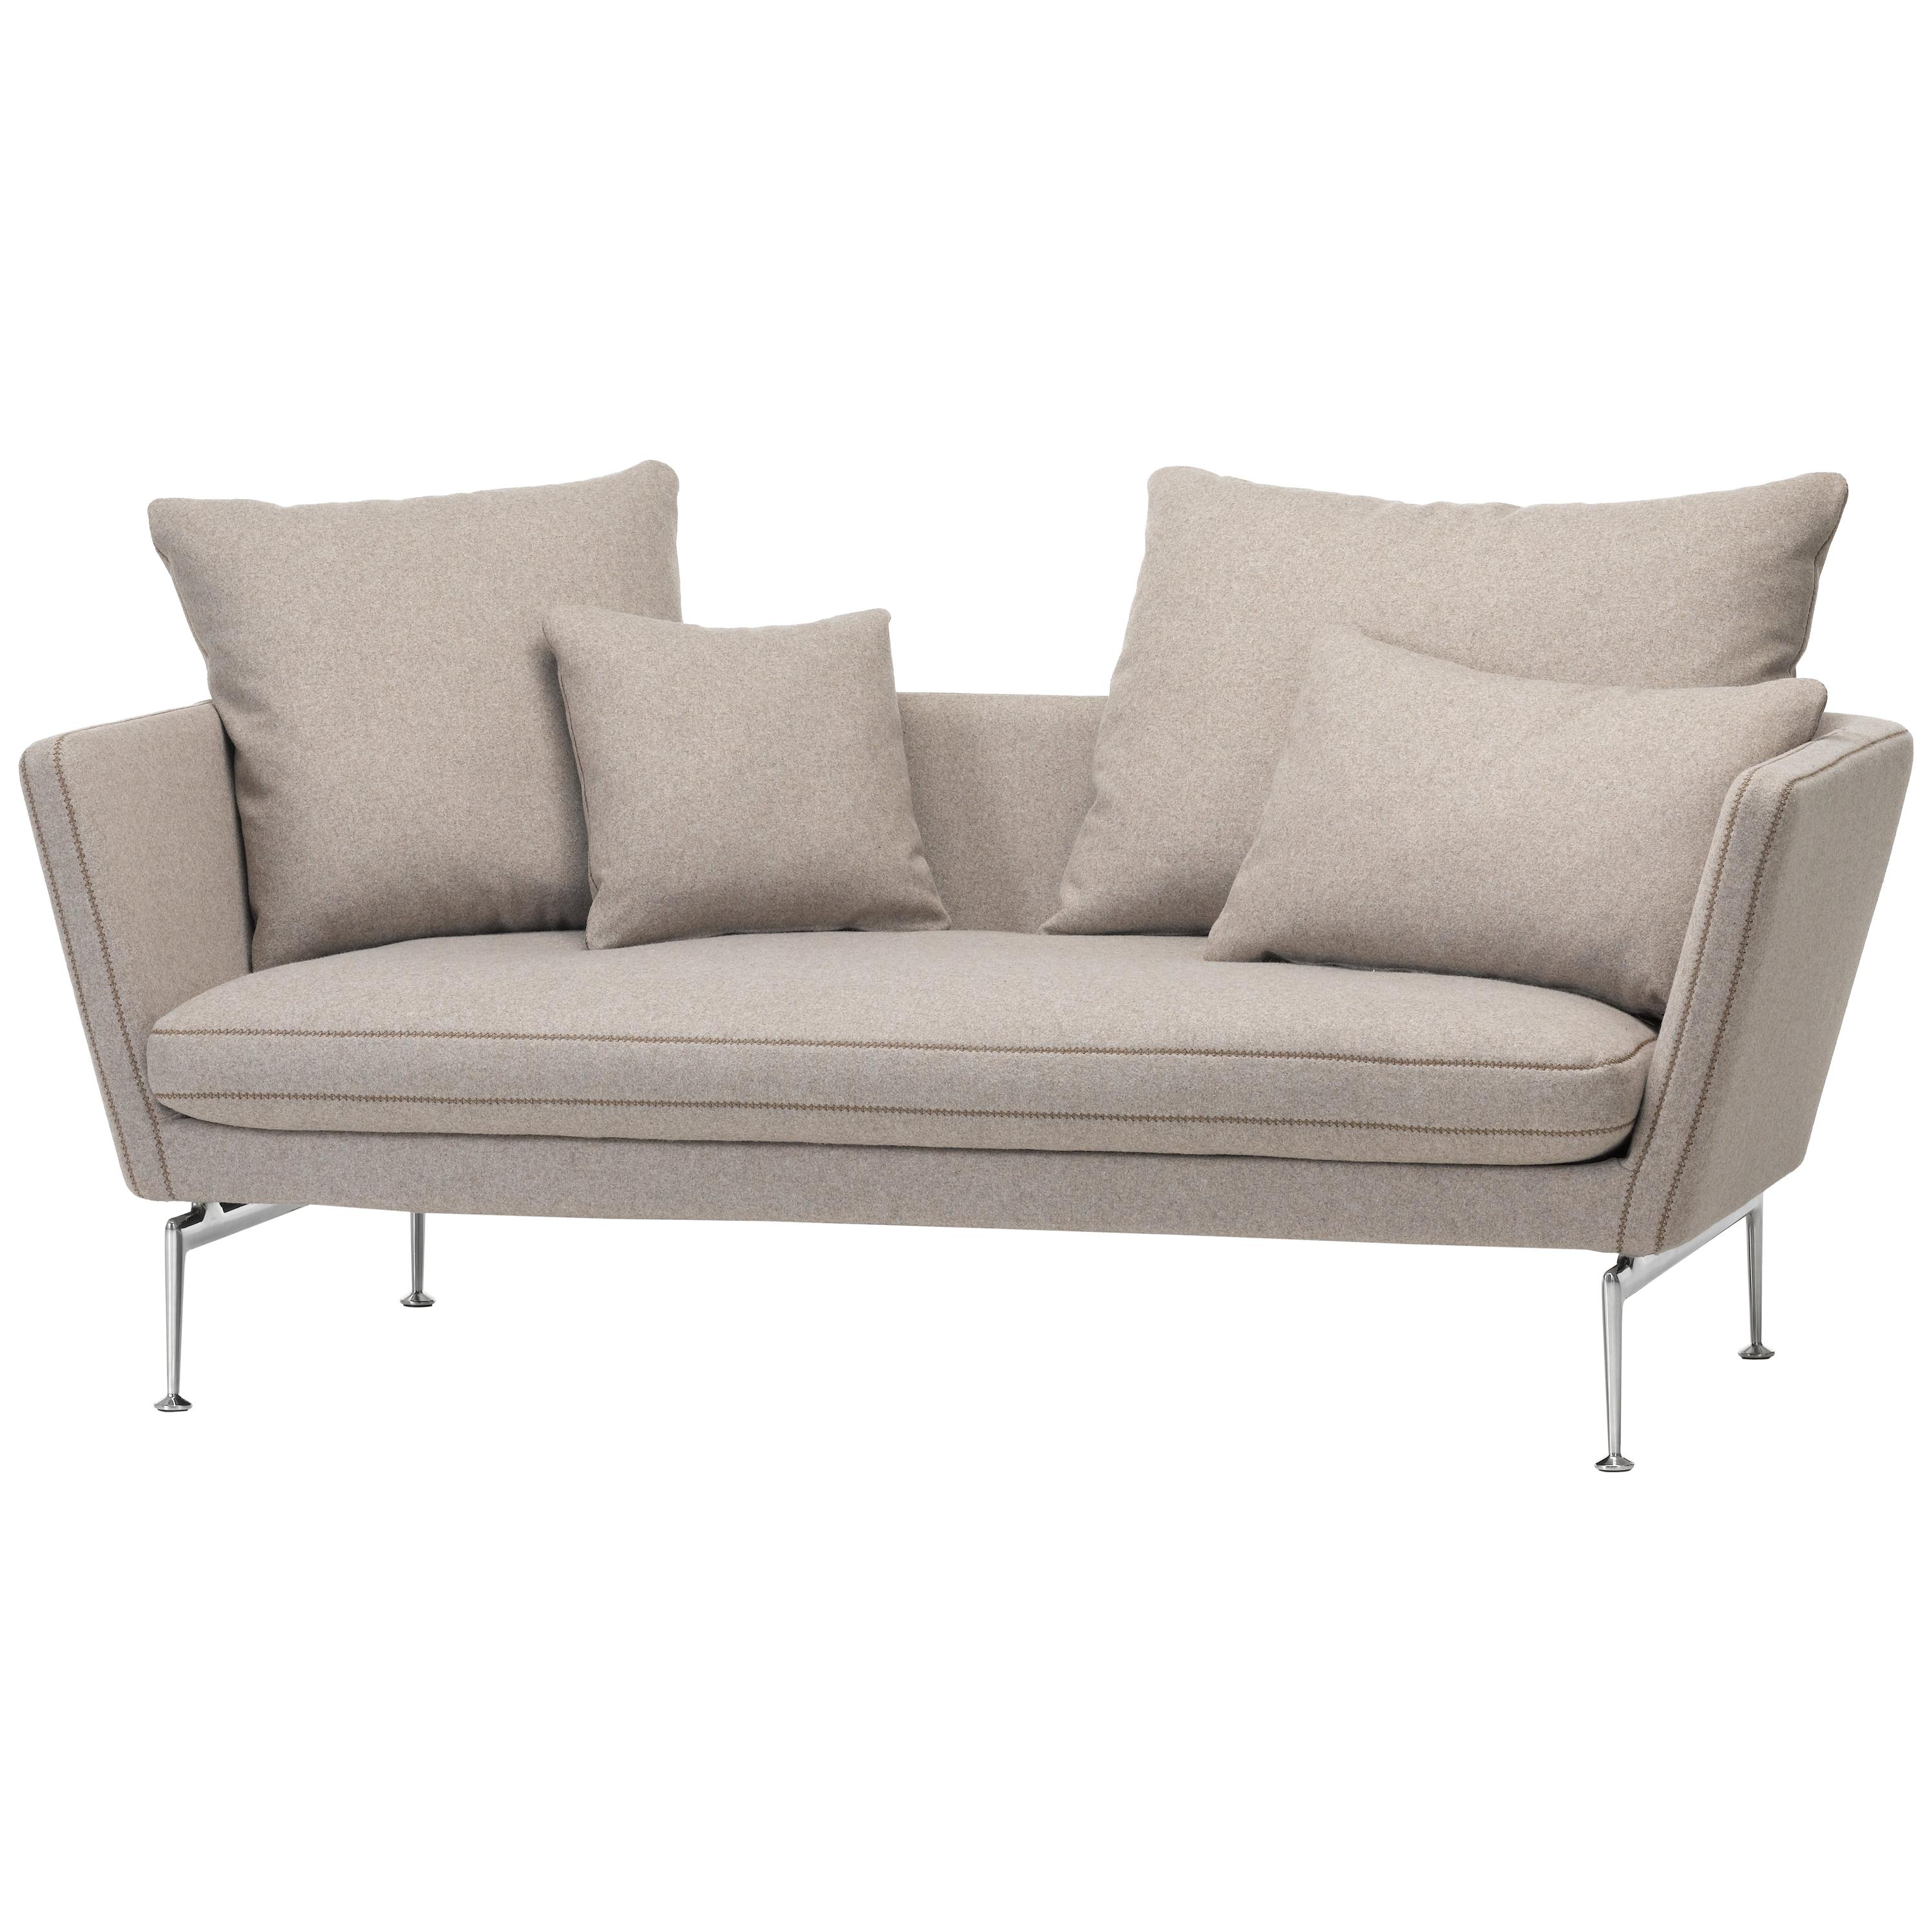 Vitra Suita Sofa Two-Seat in Fossil Cosy by Antonio Citterio im Angebot